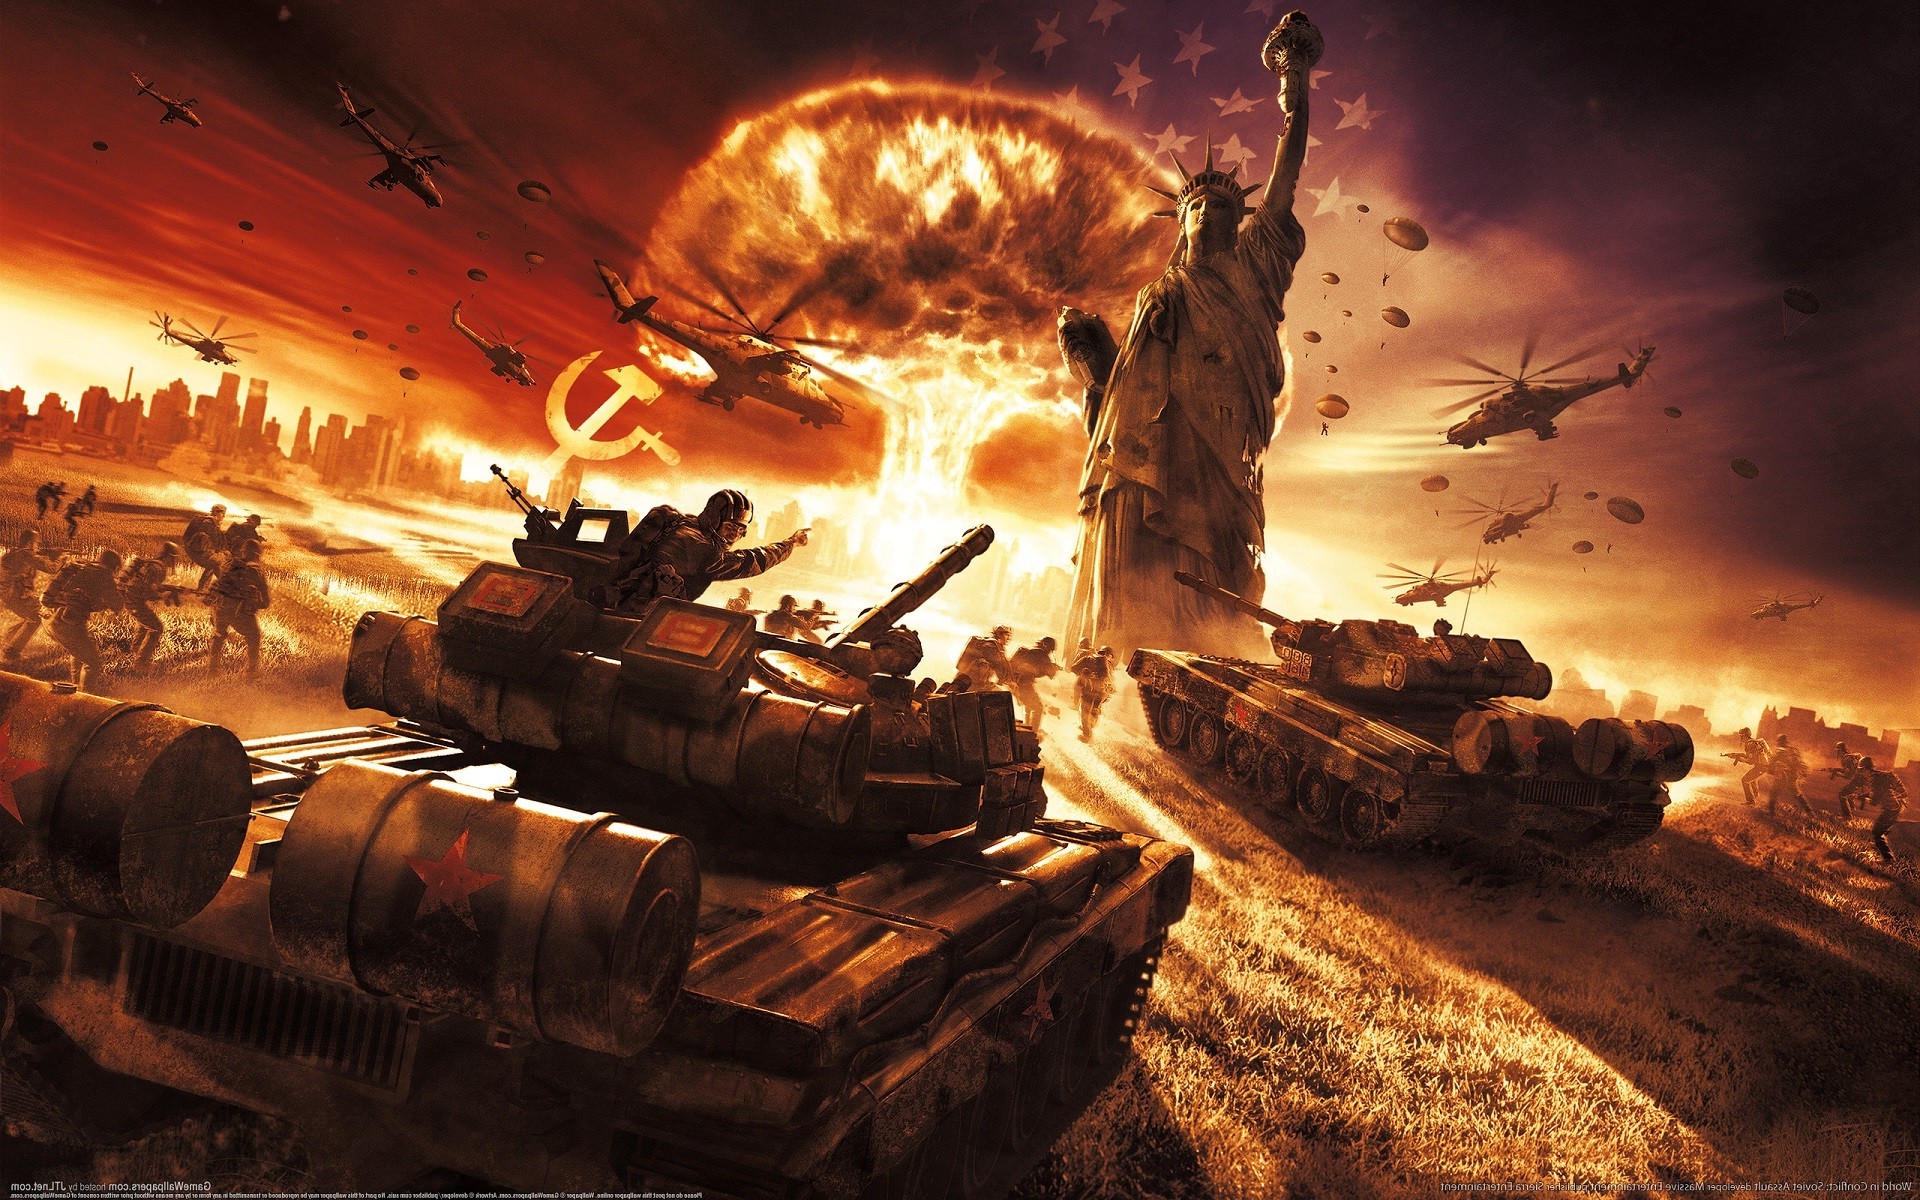 world In Conflict, Video Games, Soviet Army, Soviet Union, USSR, Statue, Statue Of Liberty, Aircraft, Military Aircraft, Helicopters, War, Explosion, Nuclear, Soldier, World War III Wallpaper